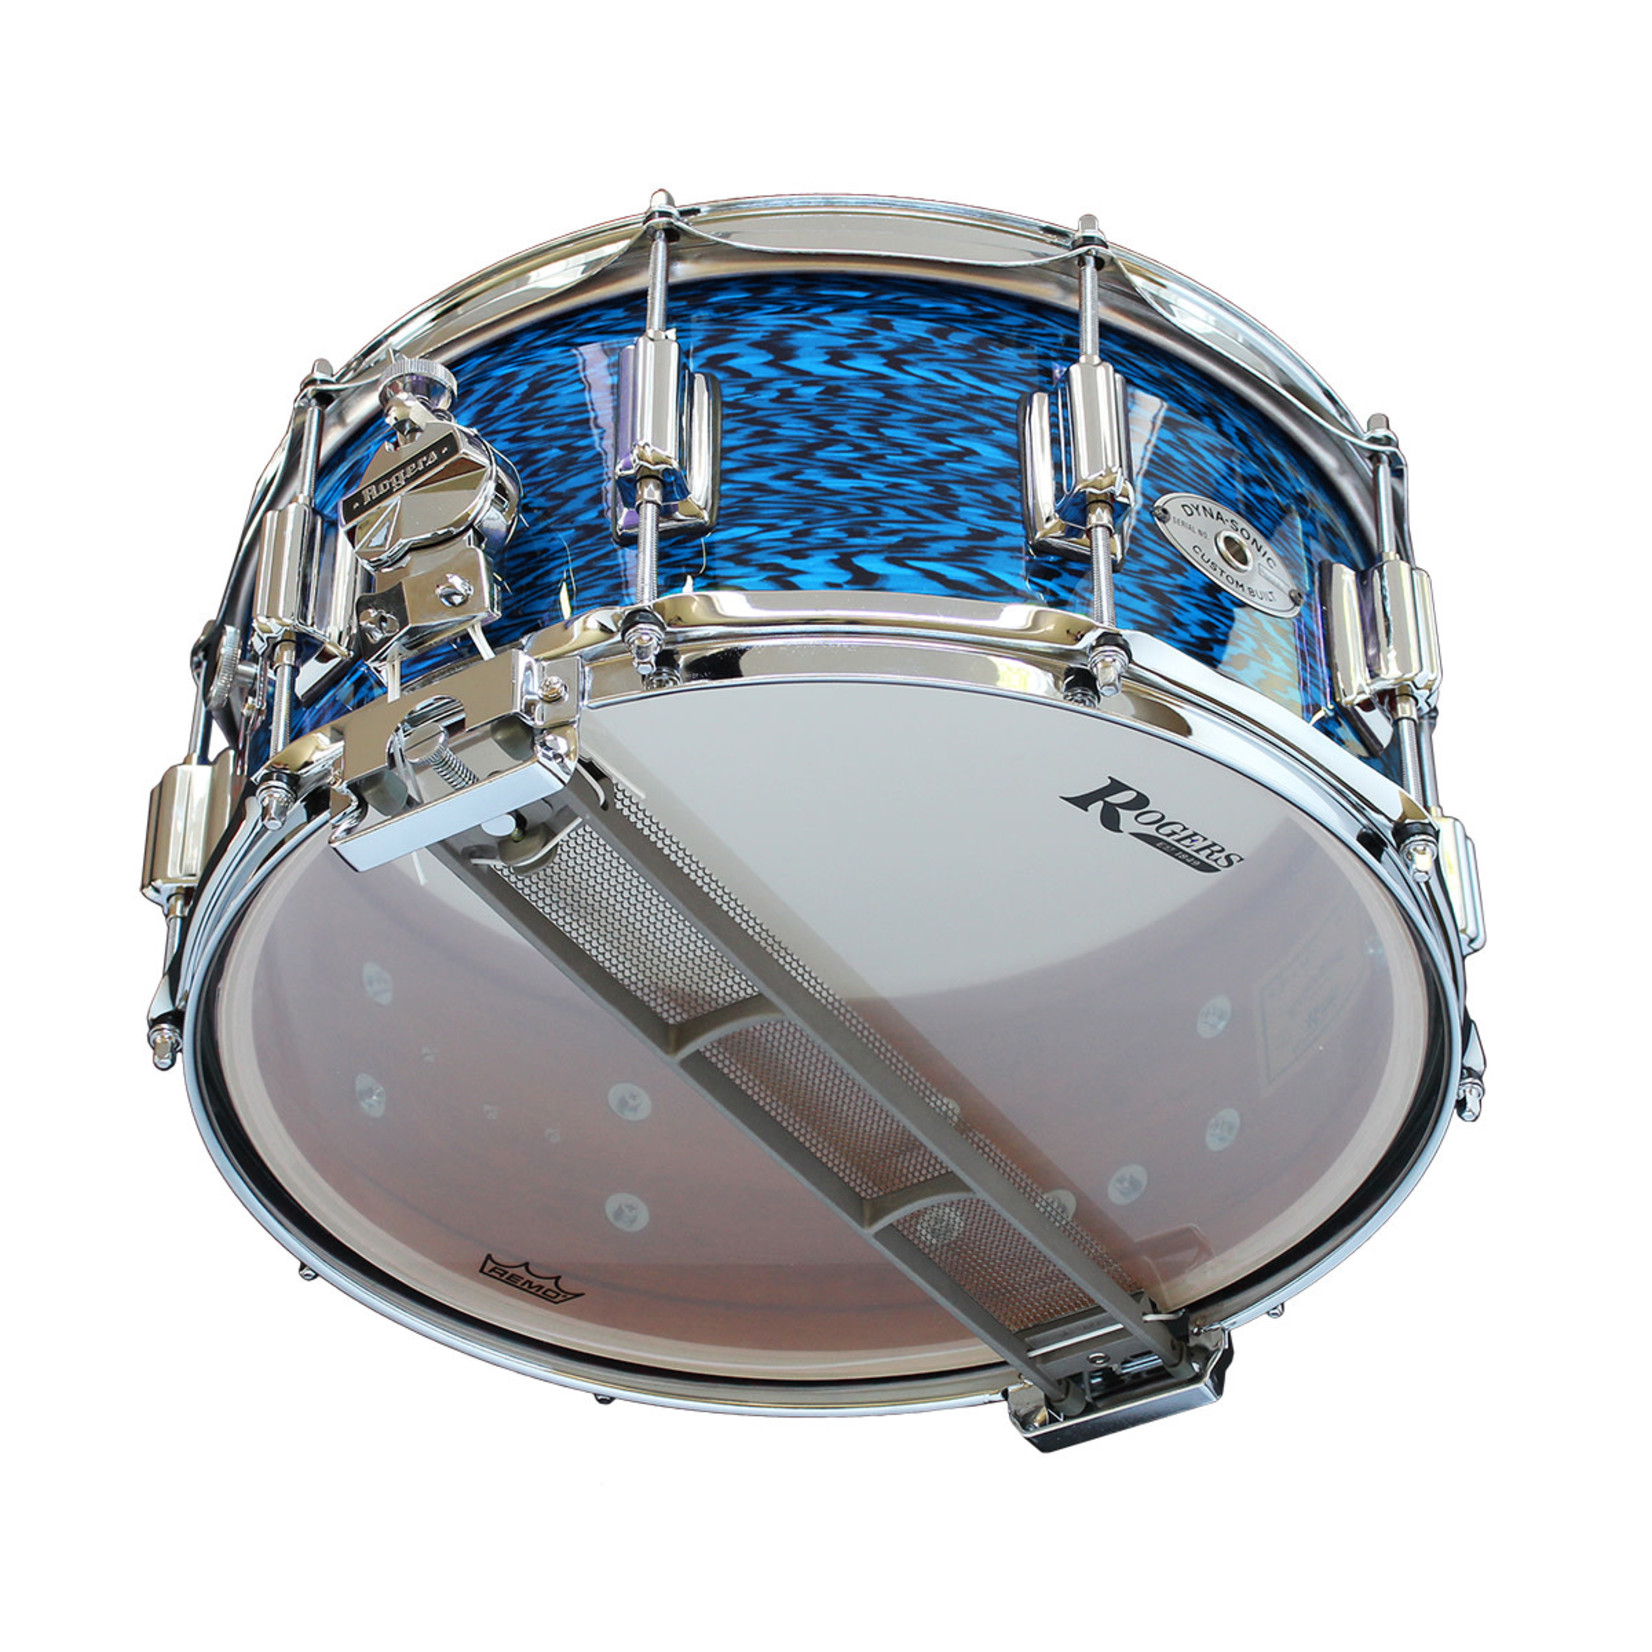 Rogers Rogers 6.5x14 Dyna-Sonic Classic Snare Drum Blue Onyx 37BLO